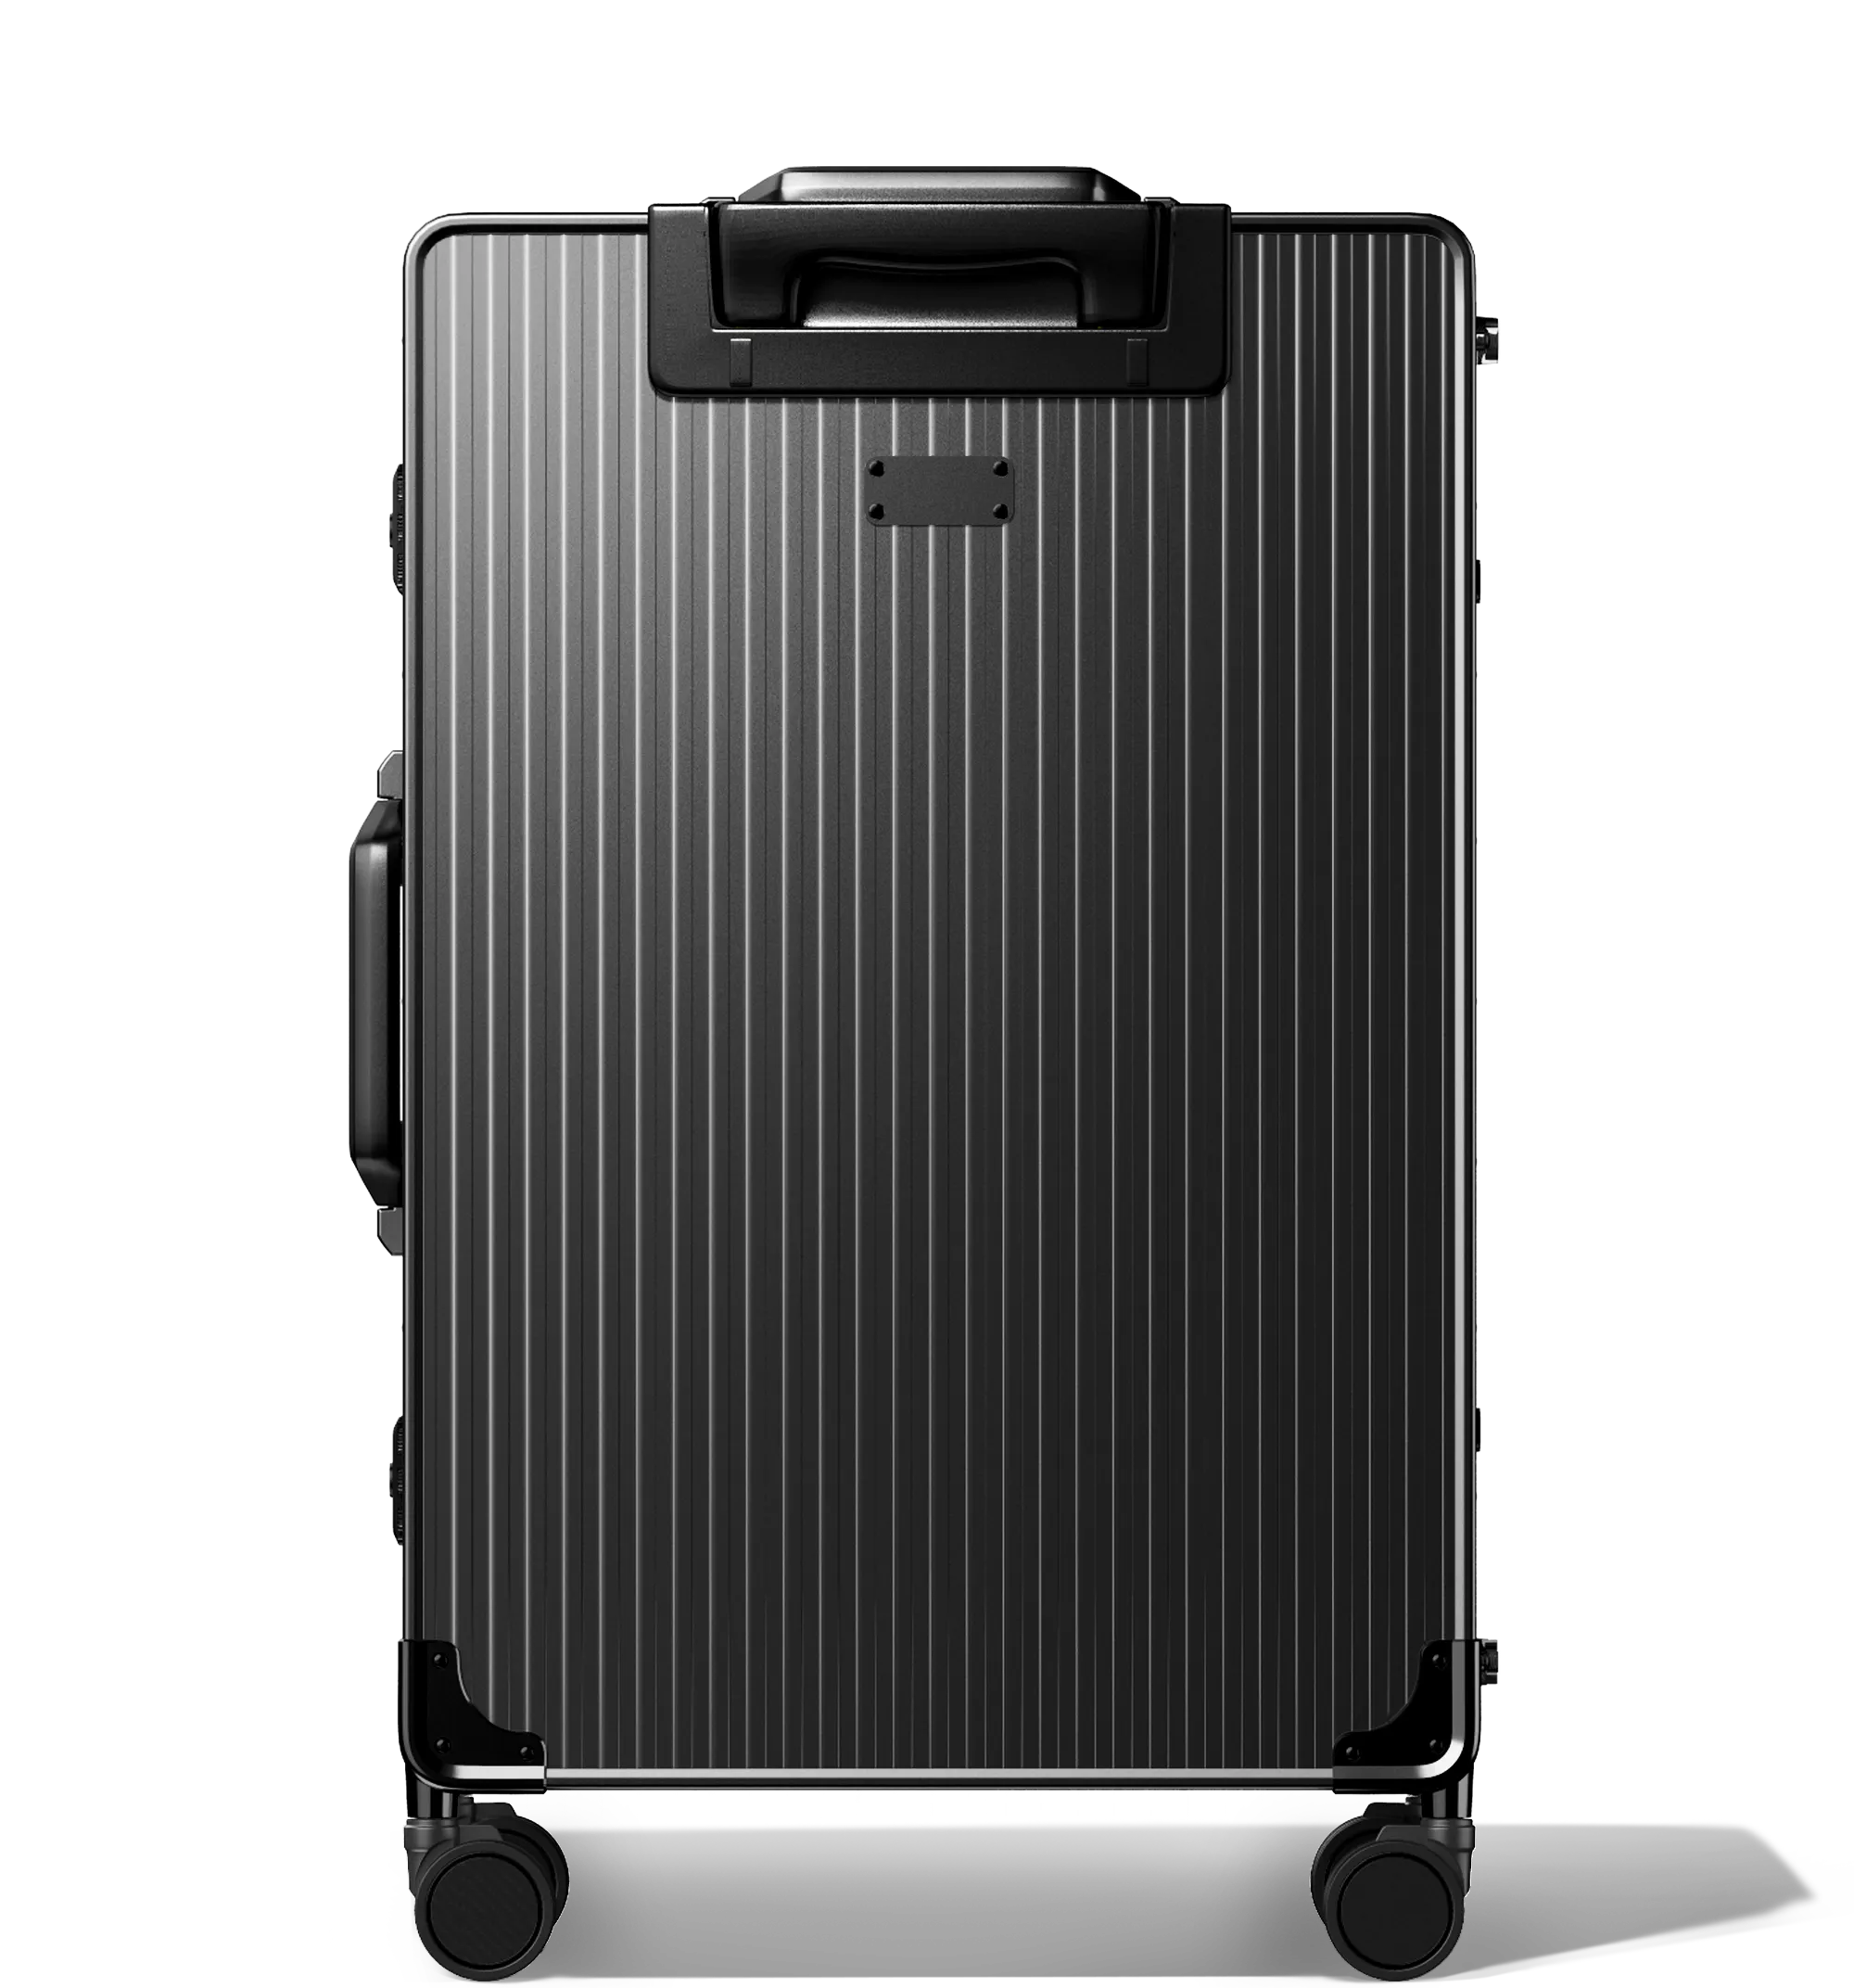 Frontal view of a black Check-In 65/25 , vertical hard-shell aluminium Luggage with ribbed texture, featuring a top handle, side latches, and four multi-directional spinner wheels, against a white background.